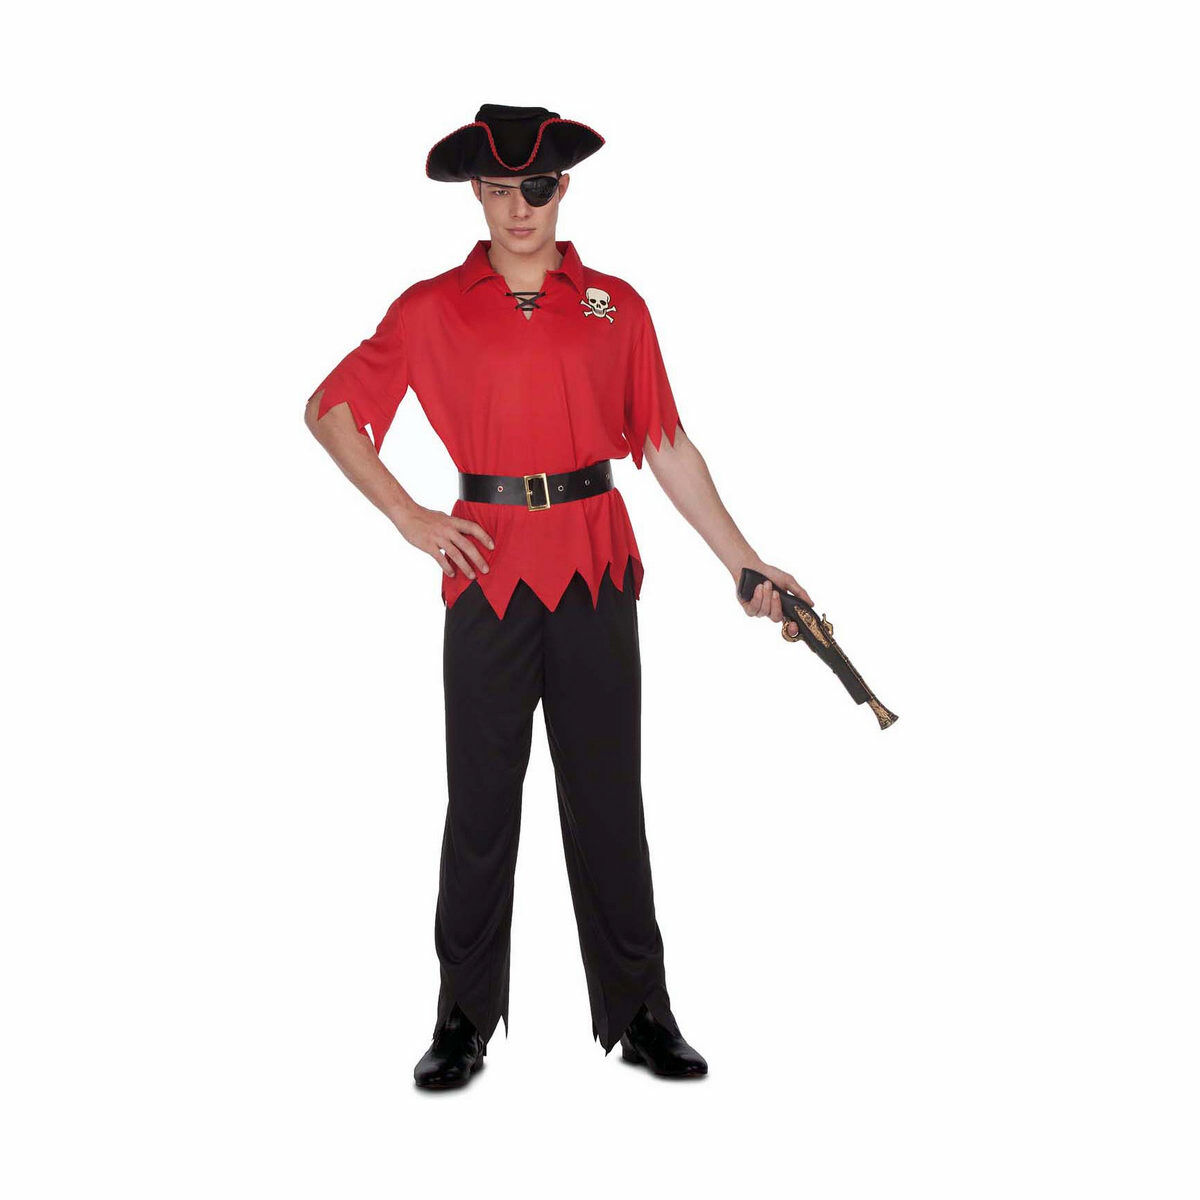 Costume for Adults My Other Me Red Pirate M/L (4 Pieces)